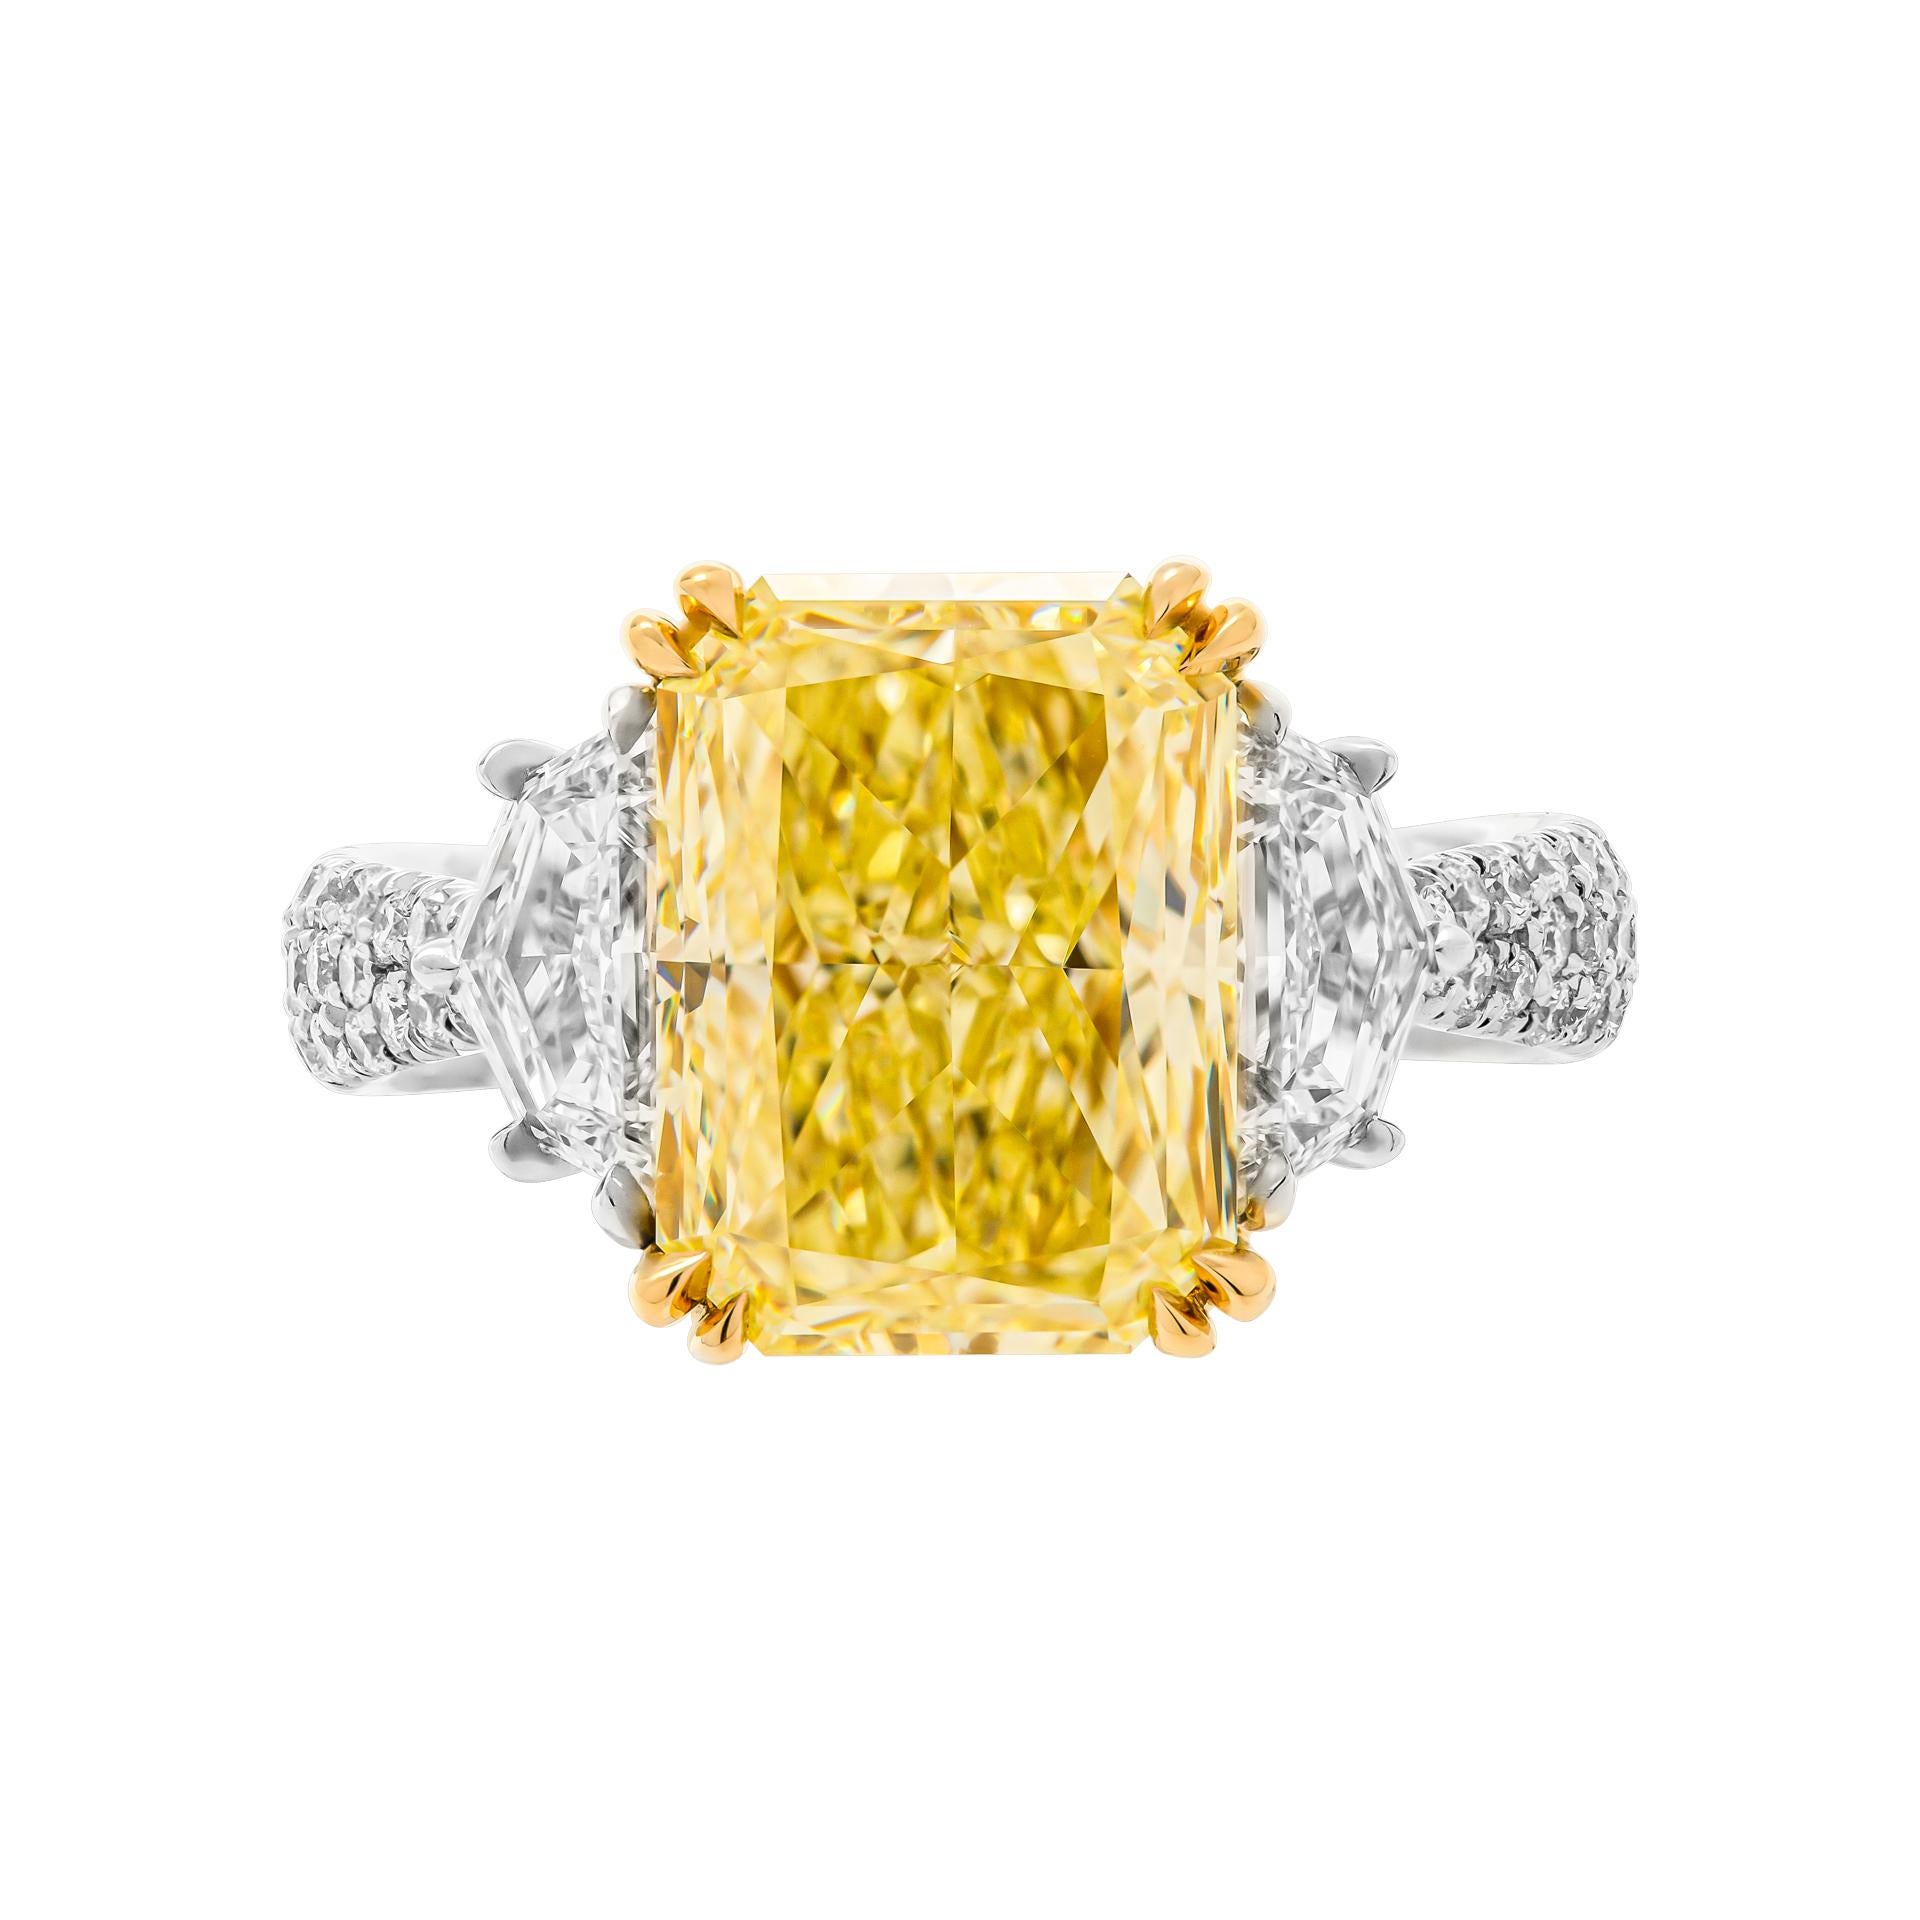 3 stone Ring in Platinum & 18K Yellow Gold
Center stone details: 
5.01ct Natural Fancy Yellow Even SI1 Radiant Shape Diamond GIA#5222019972
Side stone: 0.92ct Cadillacs F/VS 
Setting features diamond cathedral 3 row shank & diamond bridge
Size: